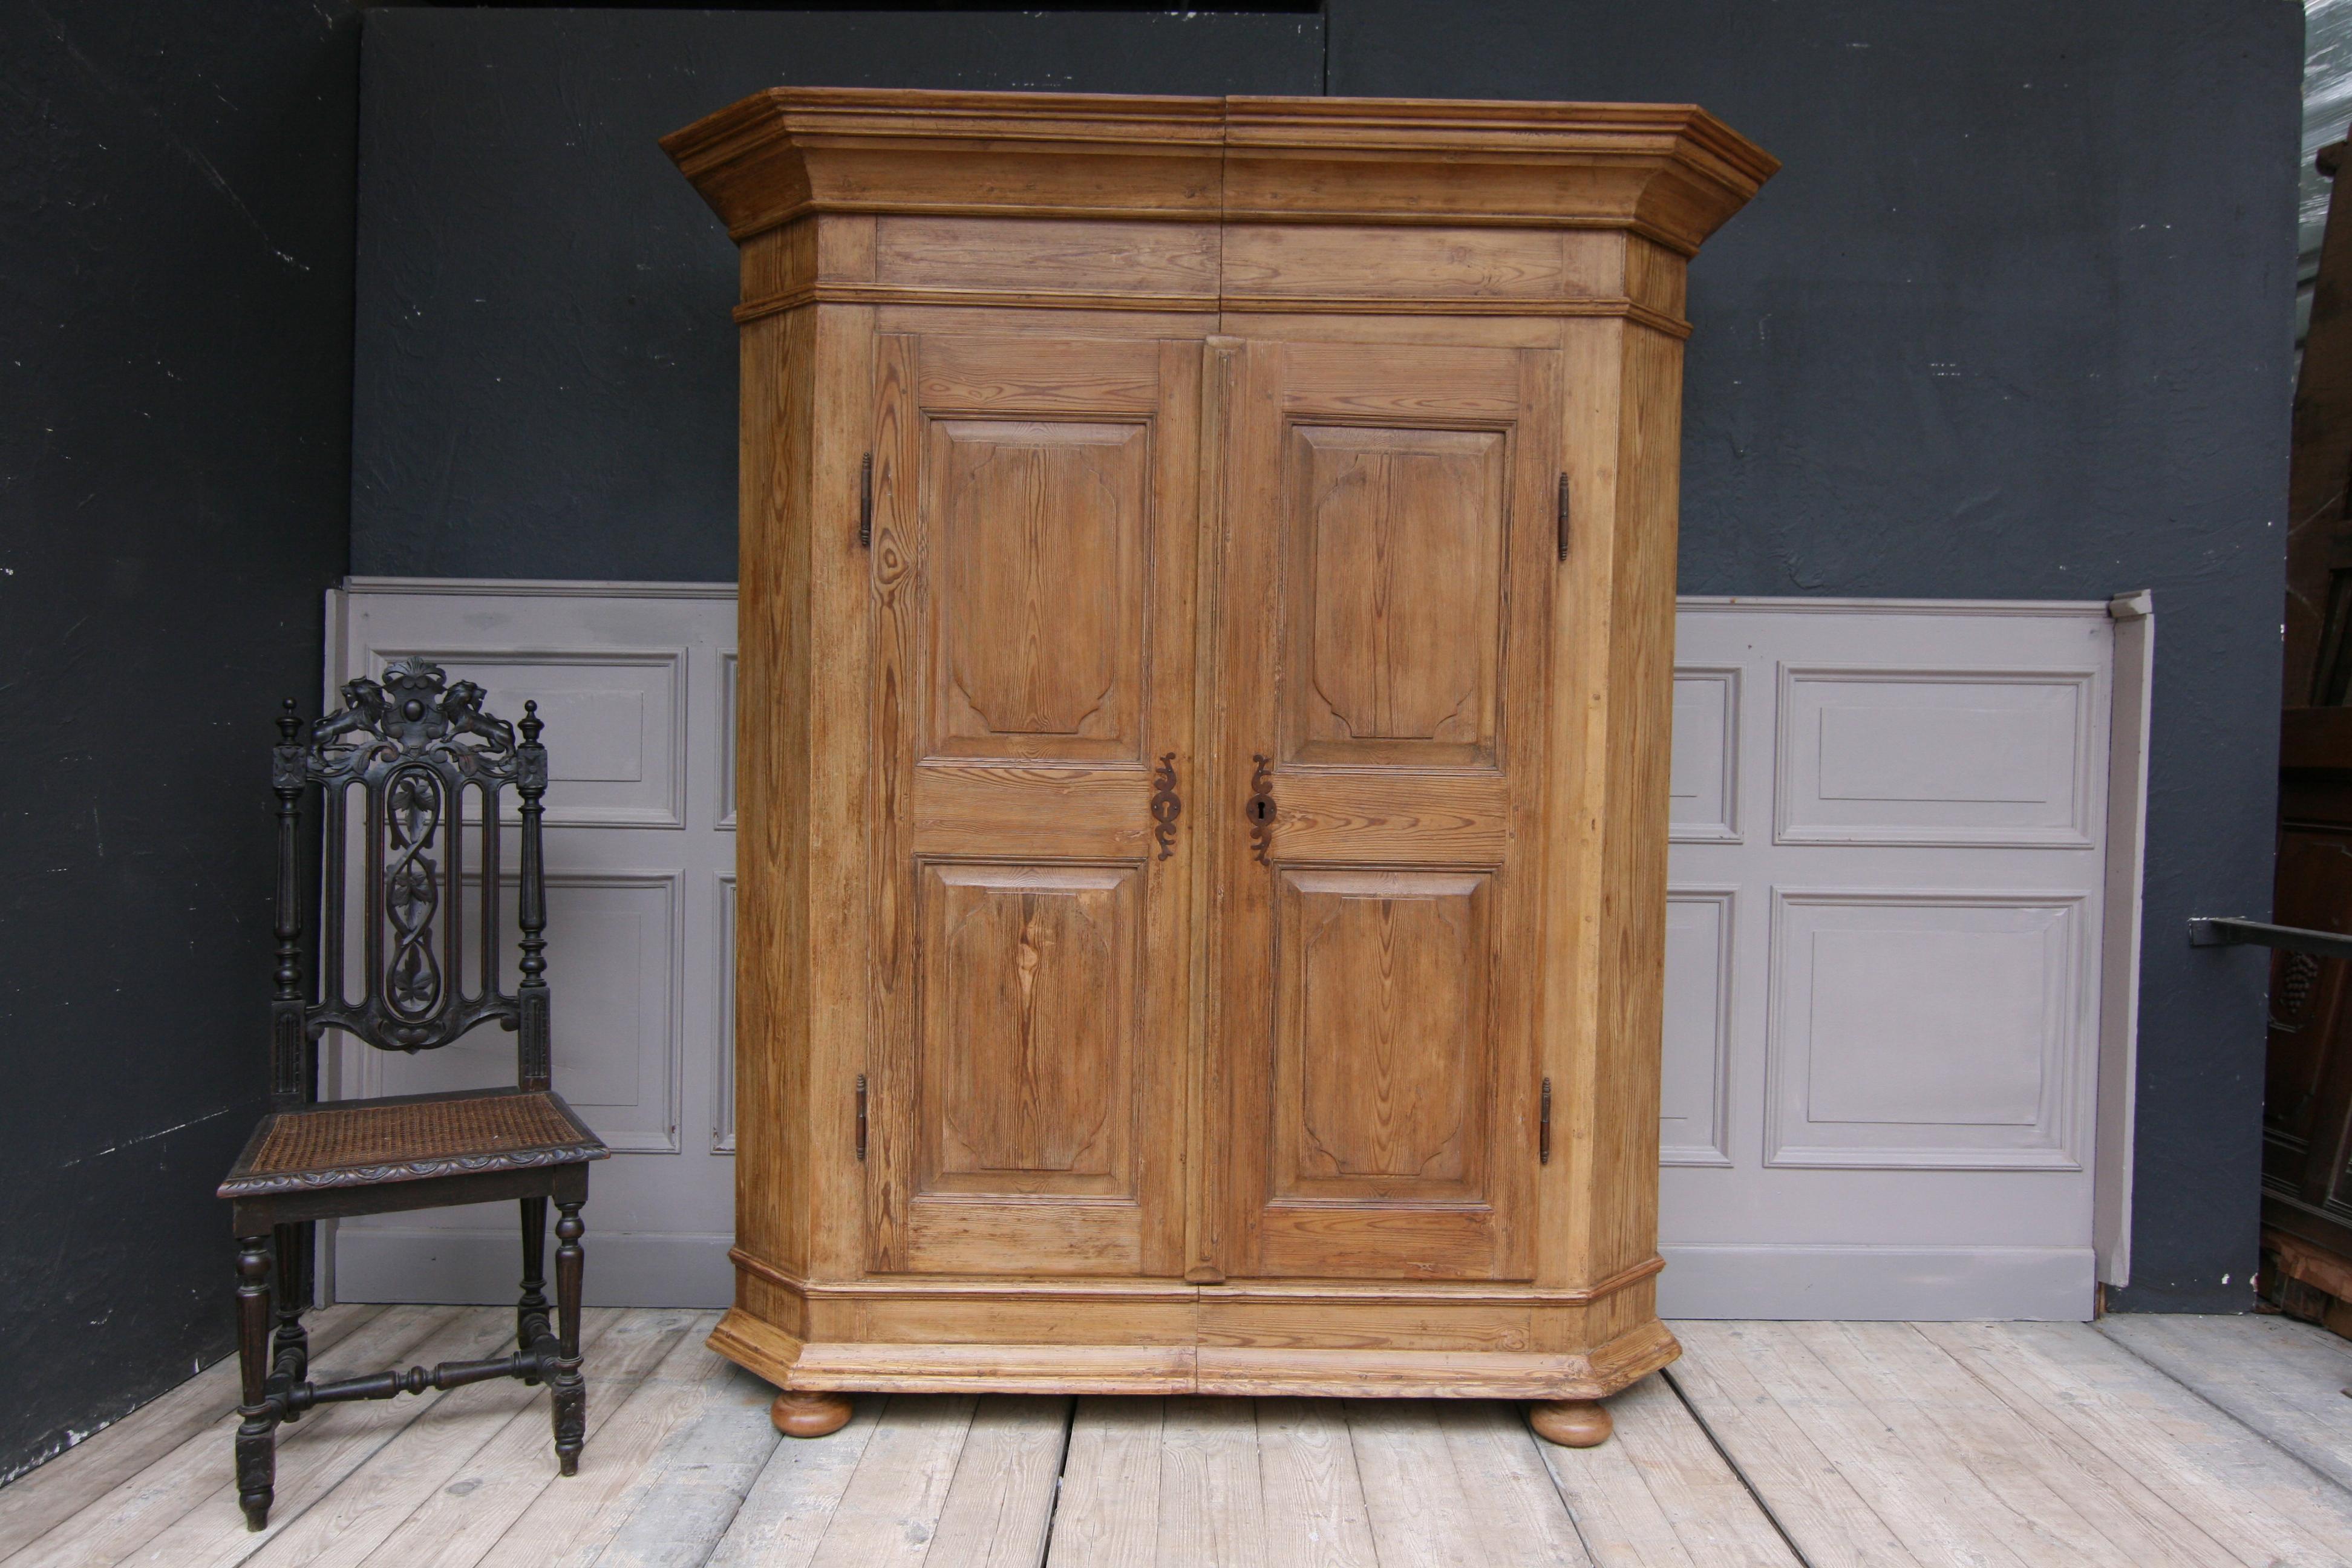 Late 18th century German Provincial Baroque cabinet made of solid pine. Restored and waxed.

2-parted body can be split by means of a wedge connection. Bevelled corners. 2 doors on outside hinges. Original hand forged fittings, hinges and bolts